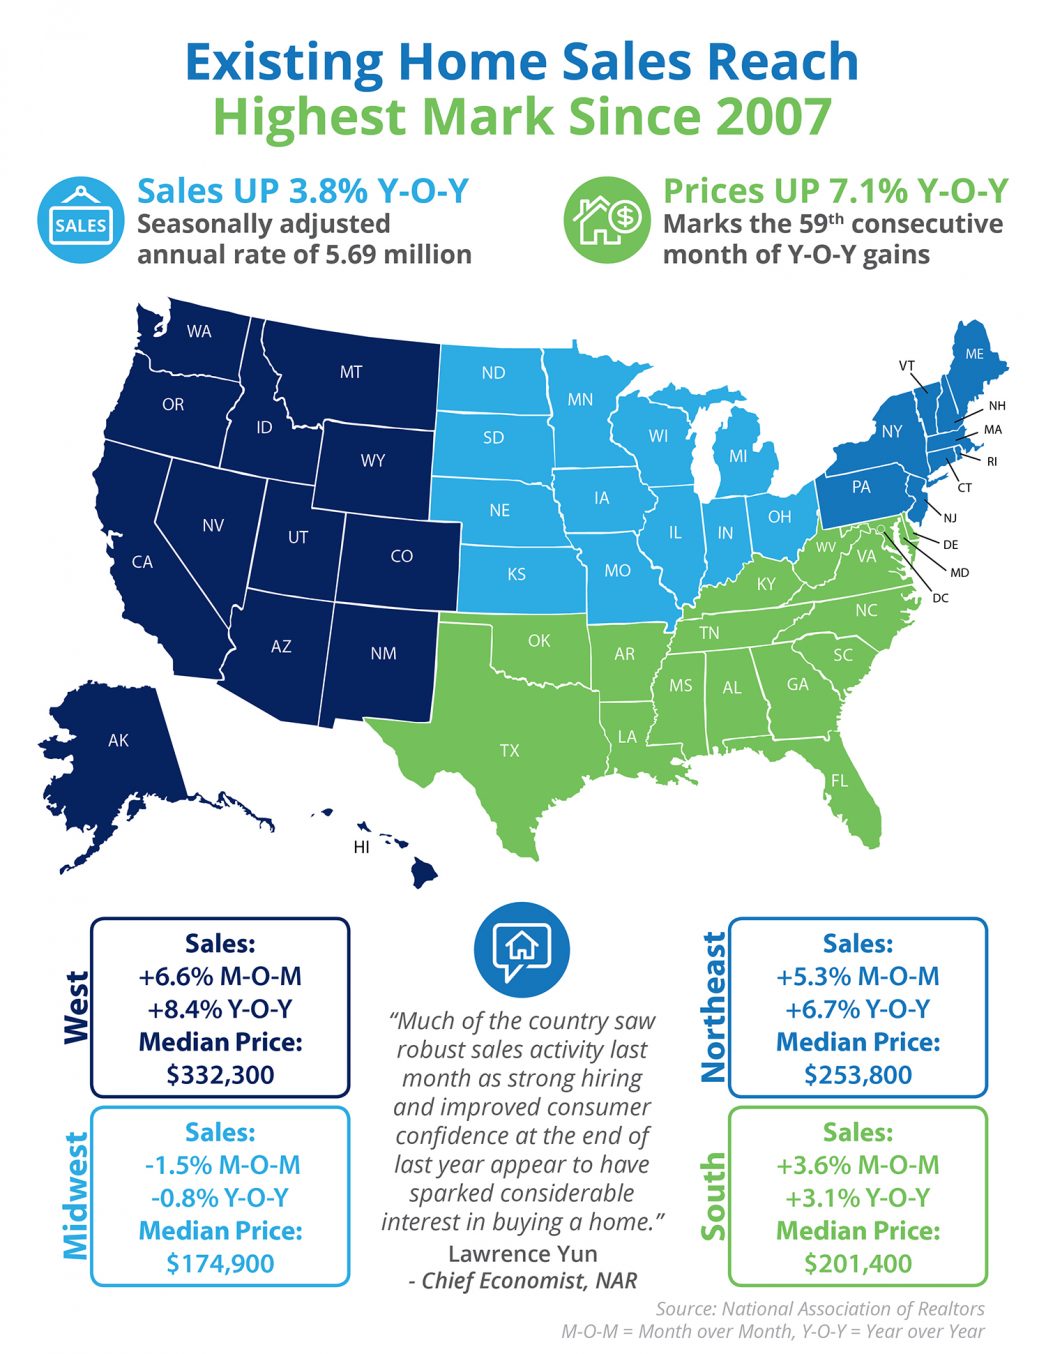 Existing Home Sales Reach Highest Mark Since 2007 [INFOGRAPHIC] | MyKCM